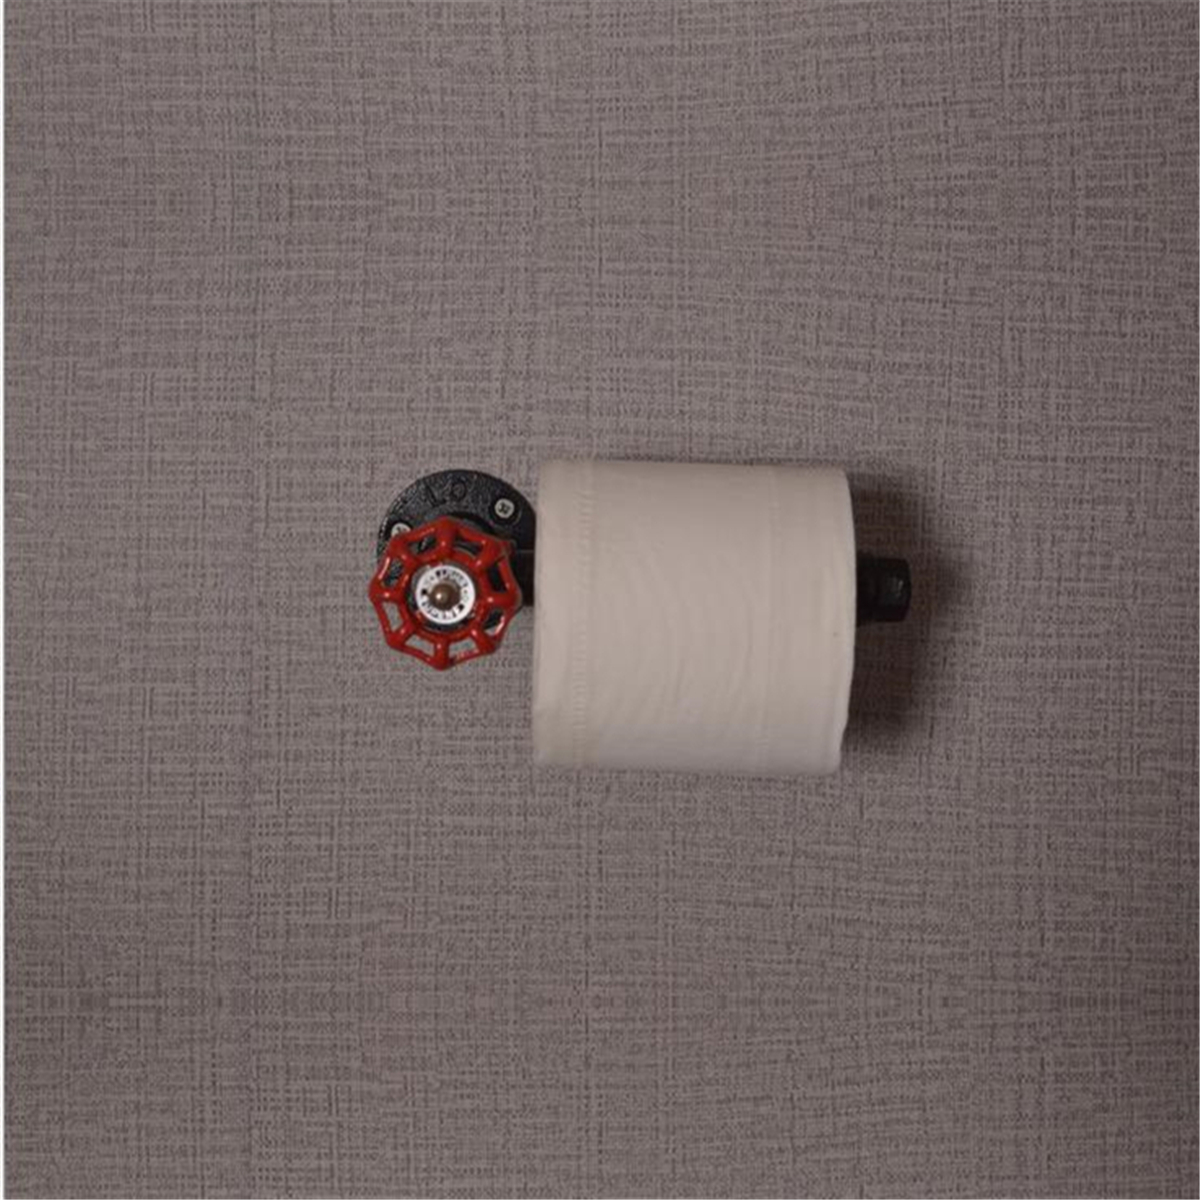 Retro-Industrial-Toilet-Paper-Roll-Holder-Pipe-Shelf-Floating-Holder-Bathroom-Wall-Mounted-1390098-2